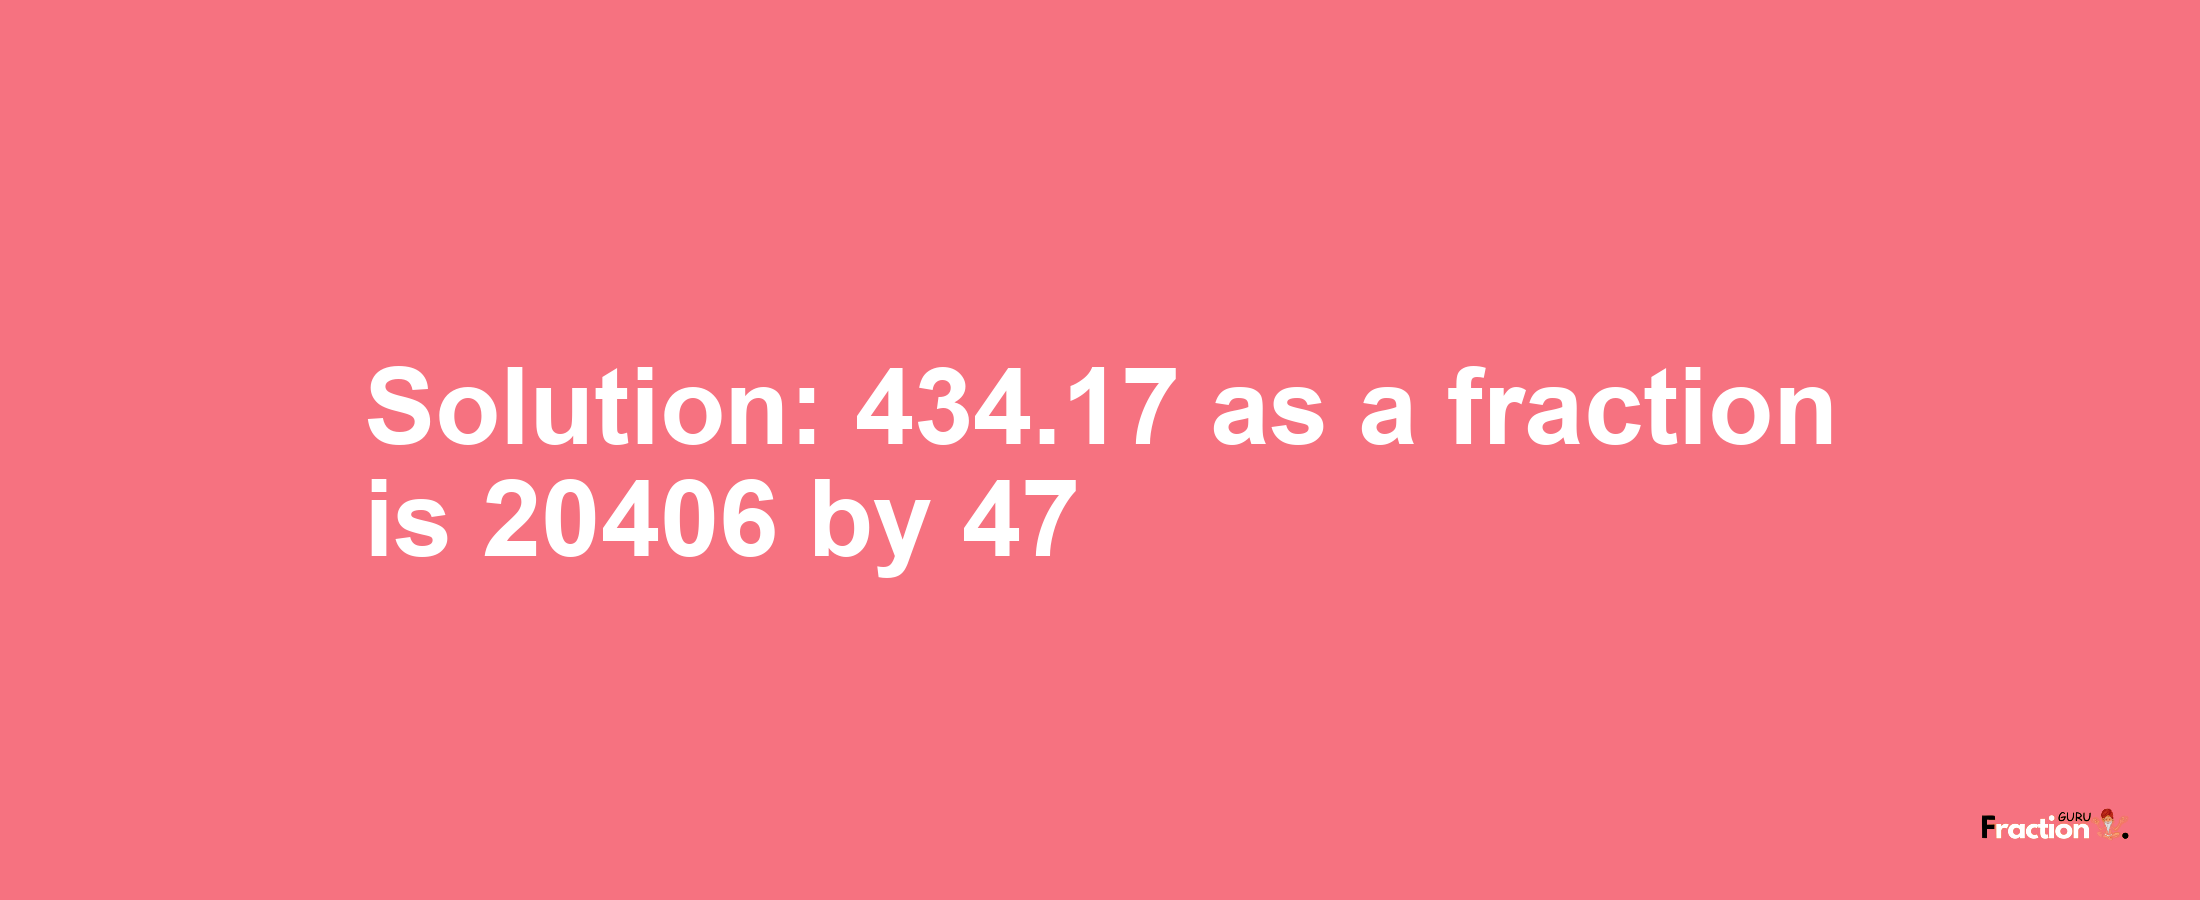 Solution:434.17 as a fraction is 20406/47